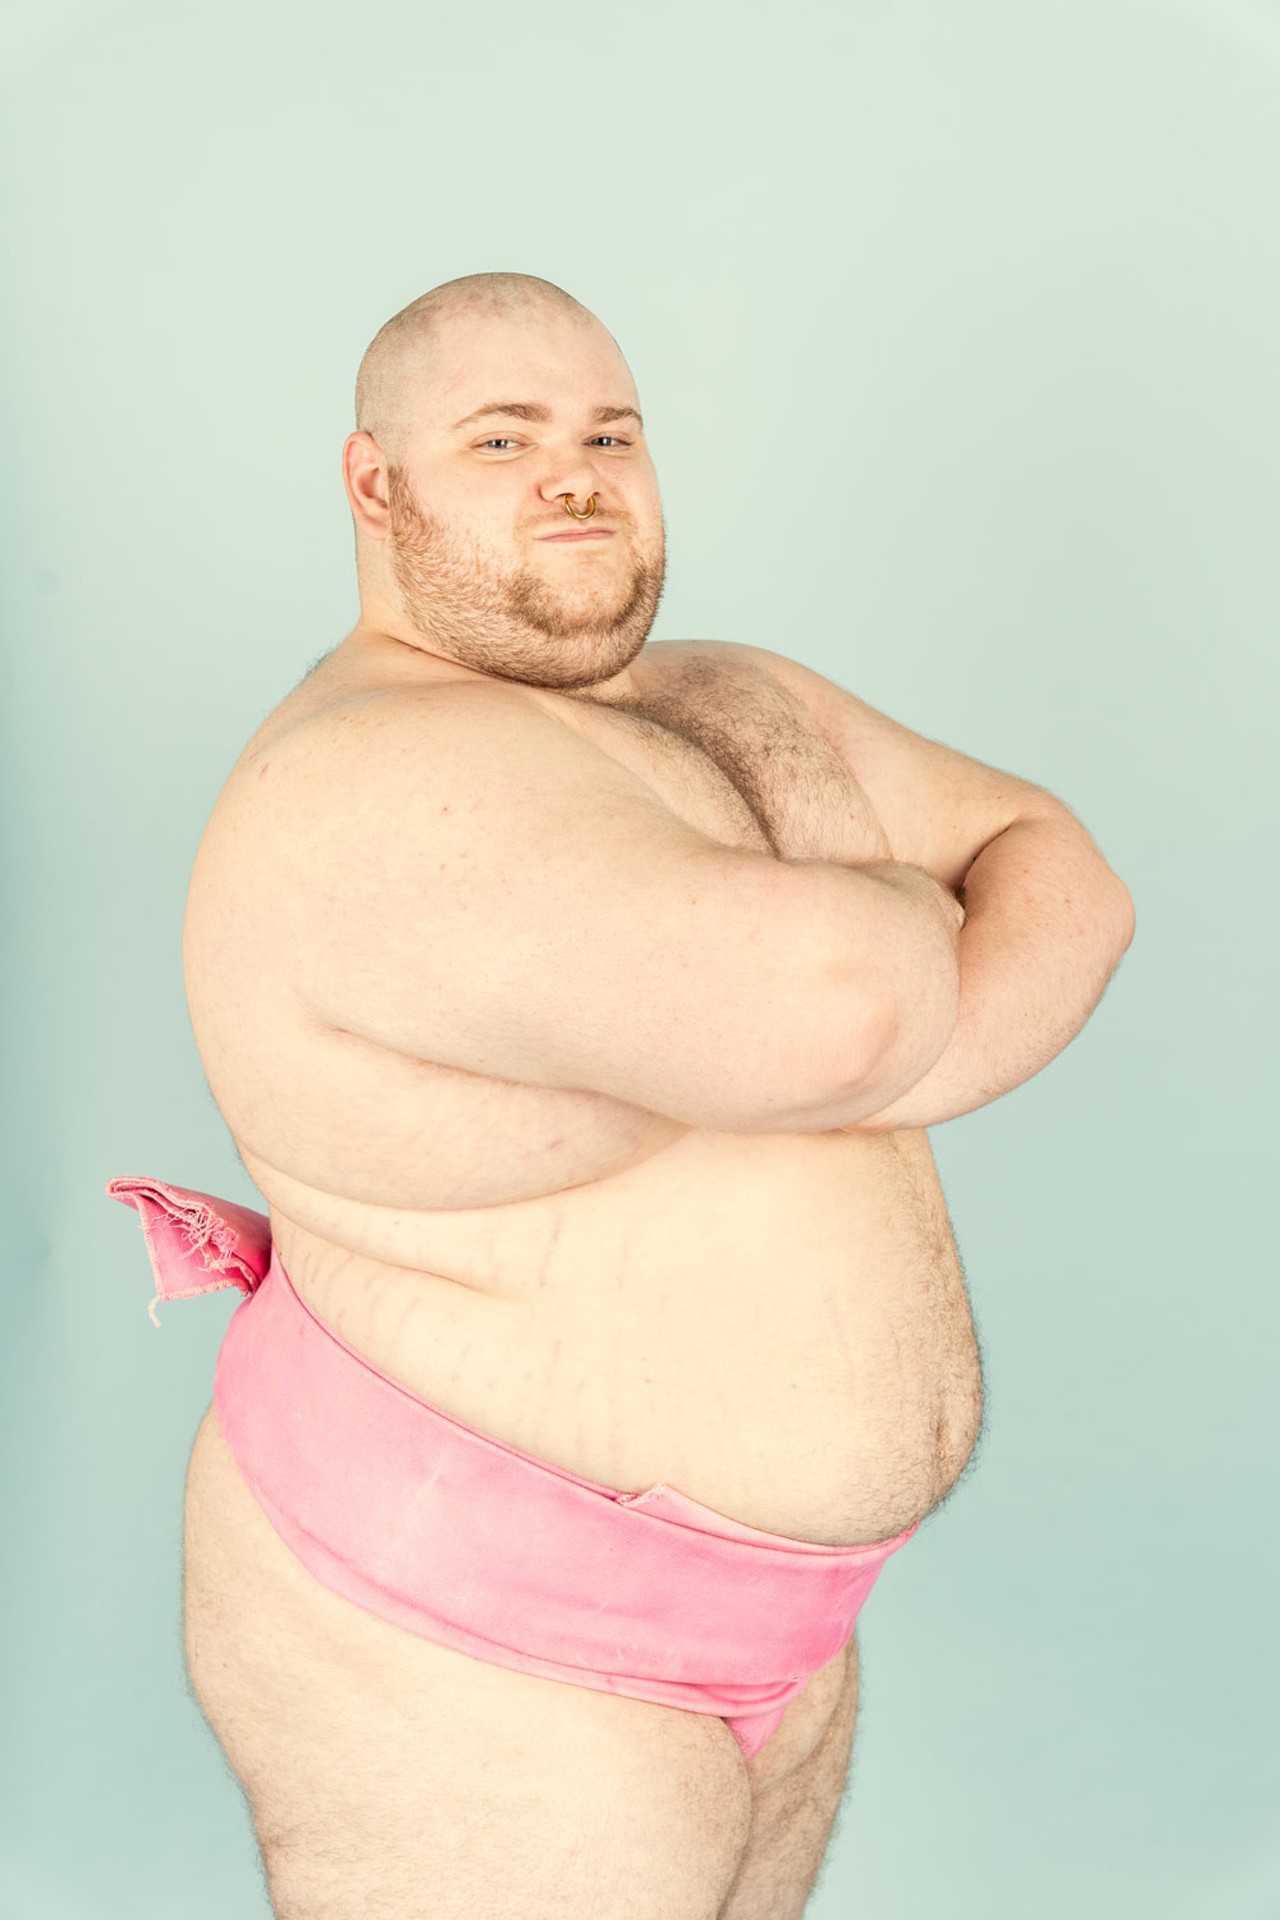 As someone who openly identifies as gay, Hawkins attests to how encouraging the sumo community has been. “Most have been super welcoming and have never made me feel ‘other than’!”